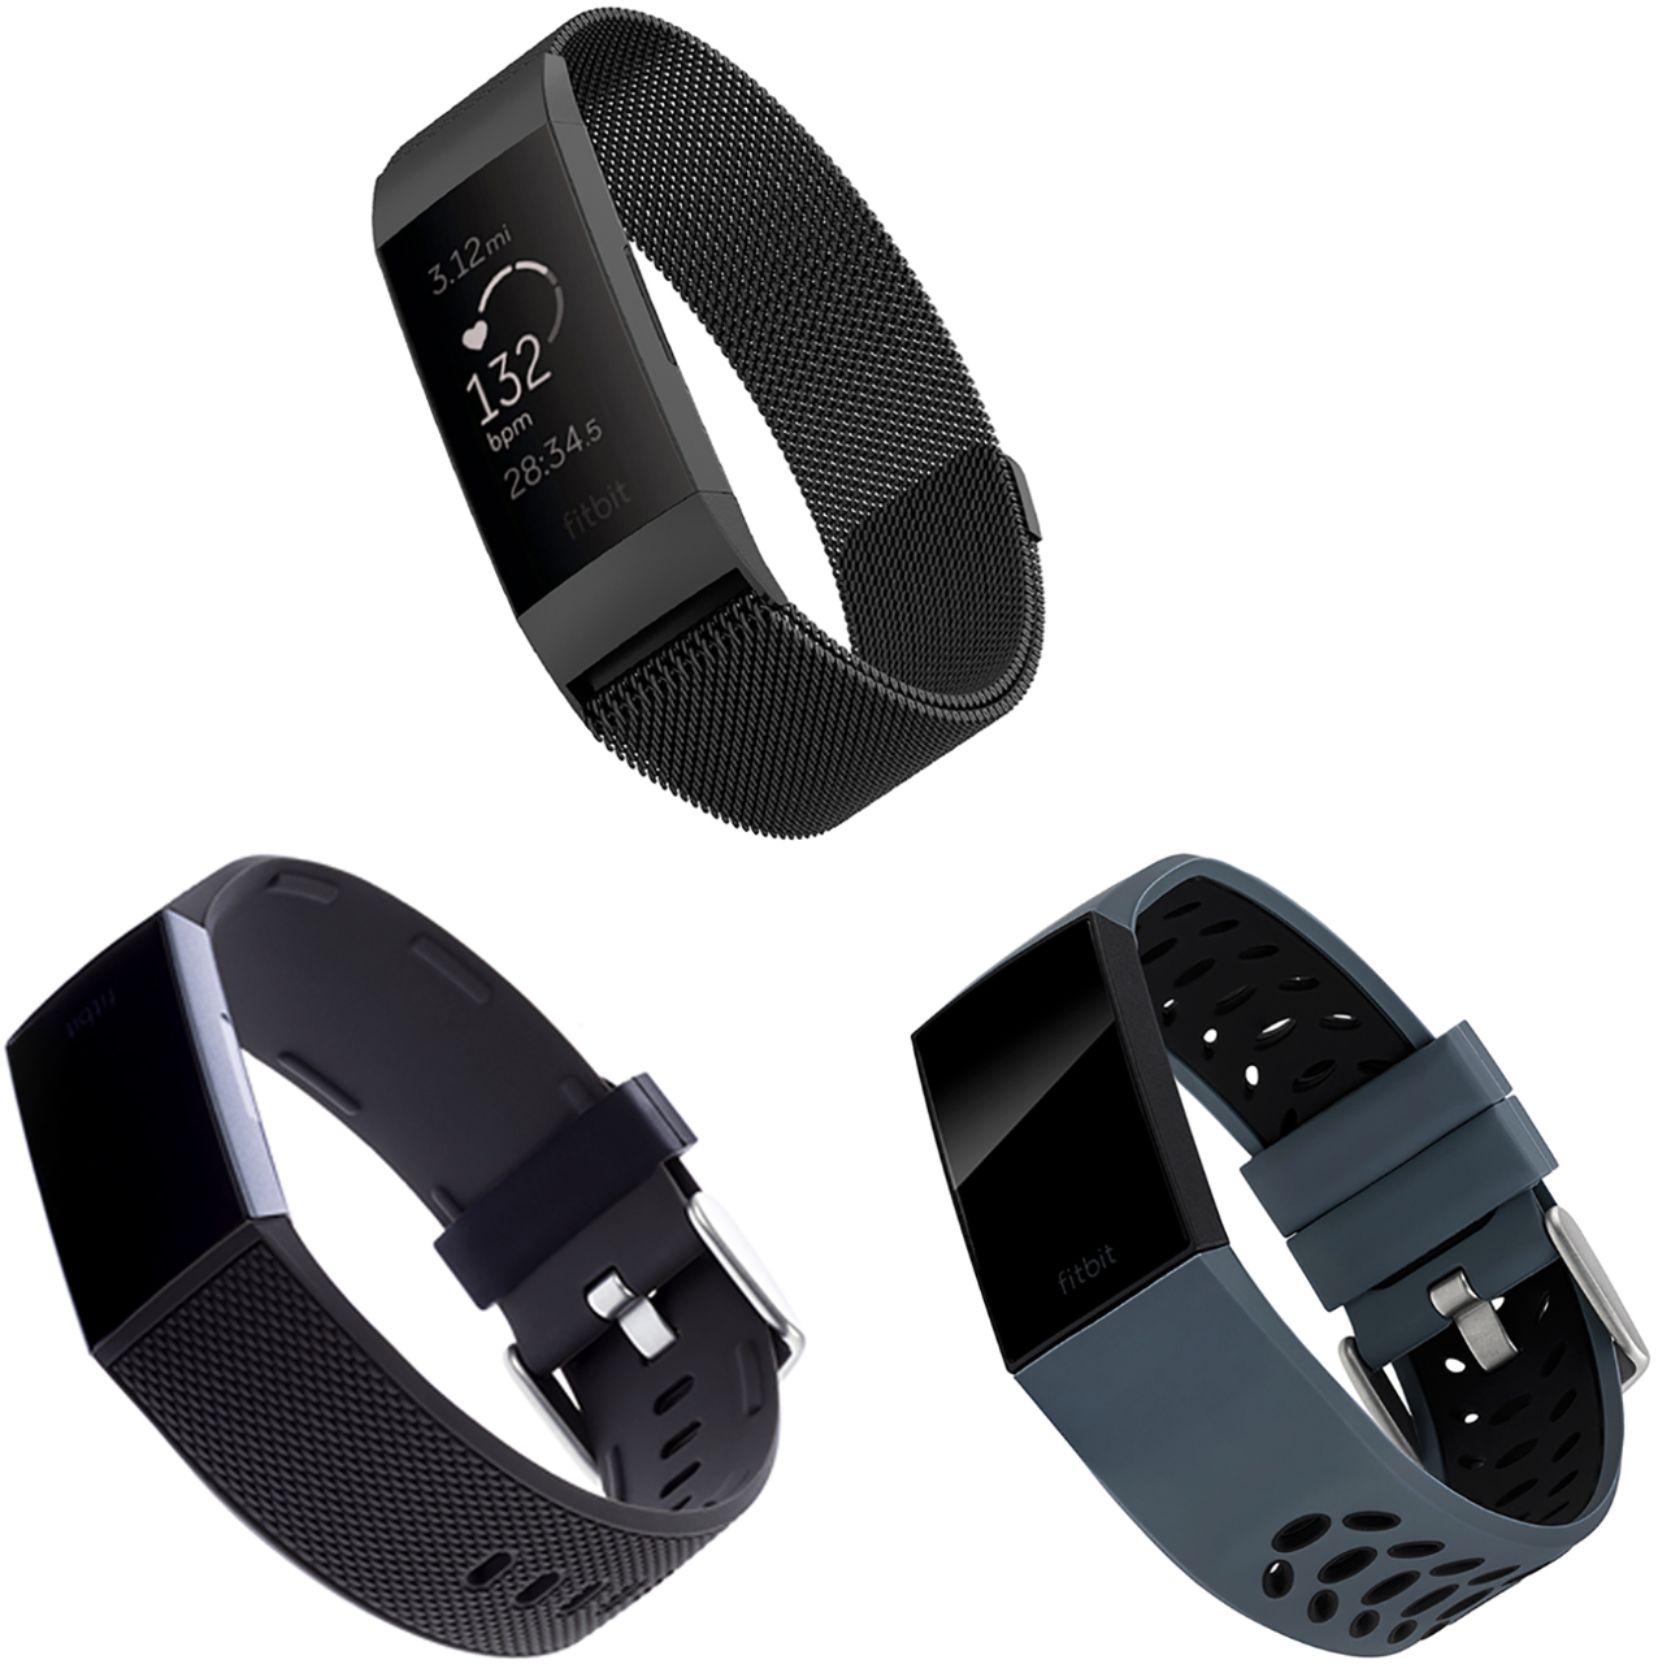 Charge 3 SE Pack 3 Silicone Bands for Fitbit Charge 4 Fitbit Charge 3 